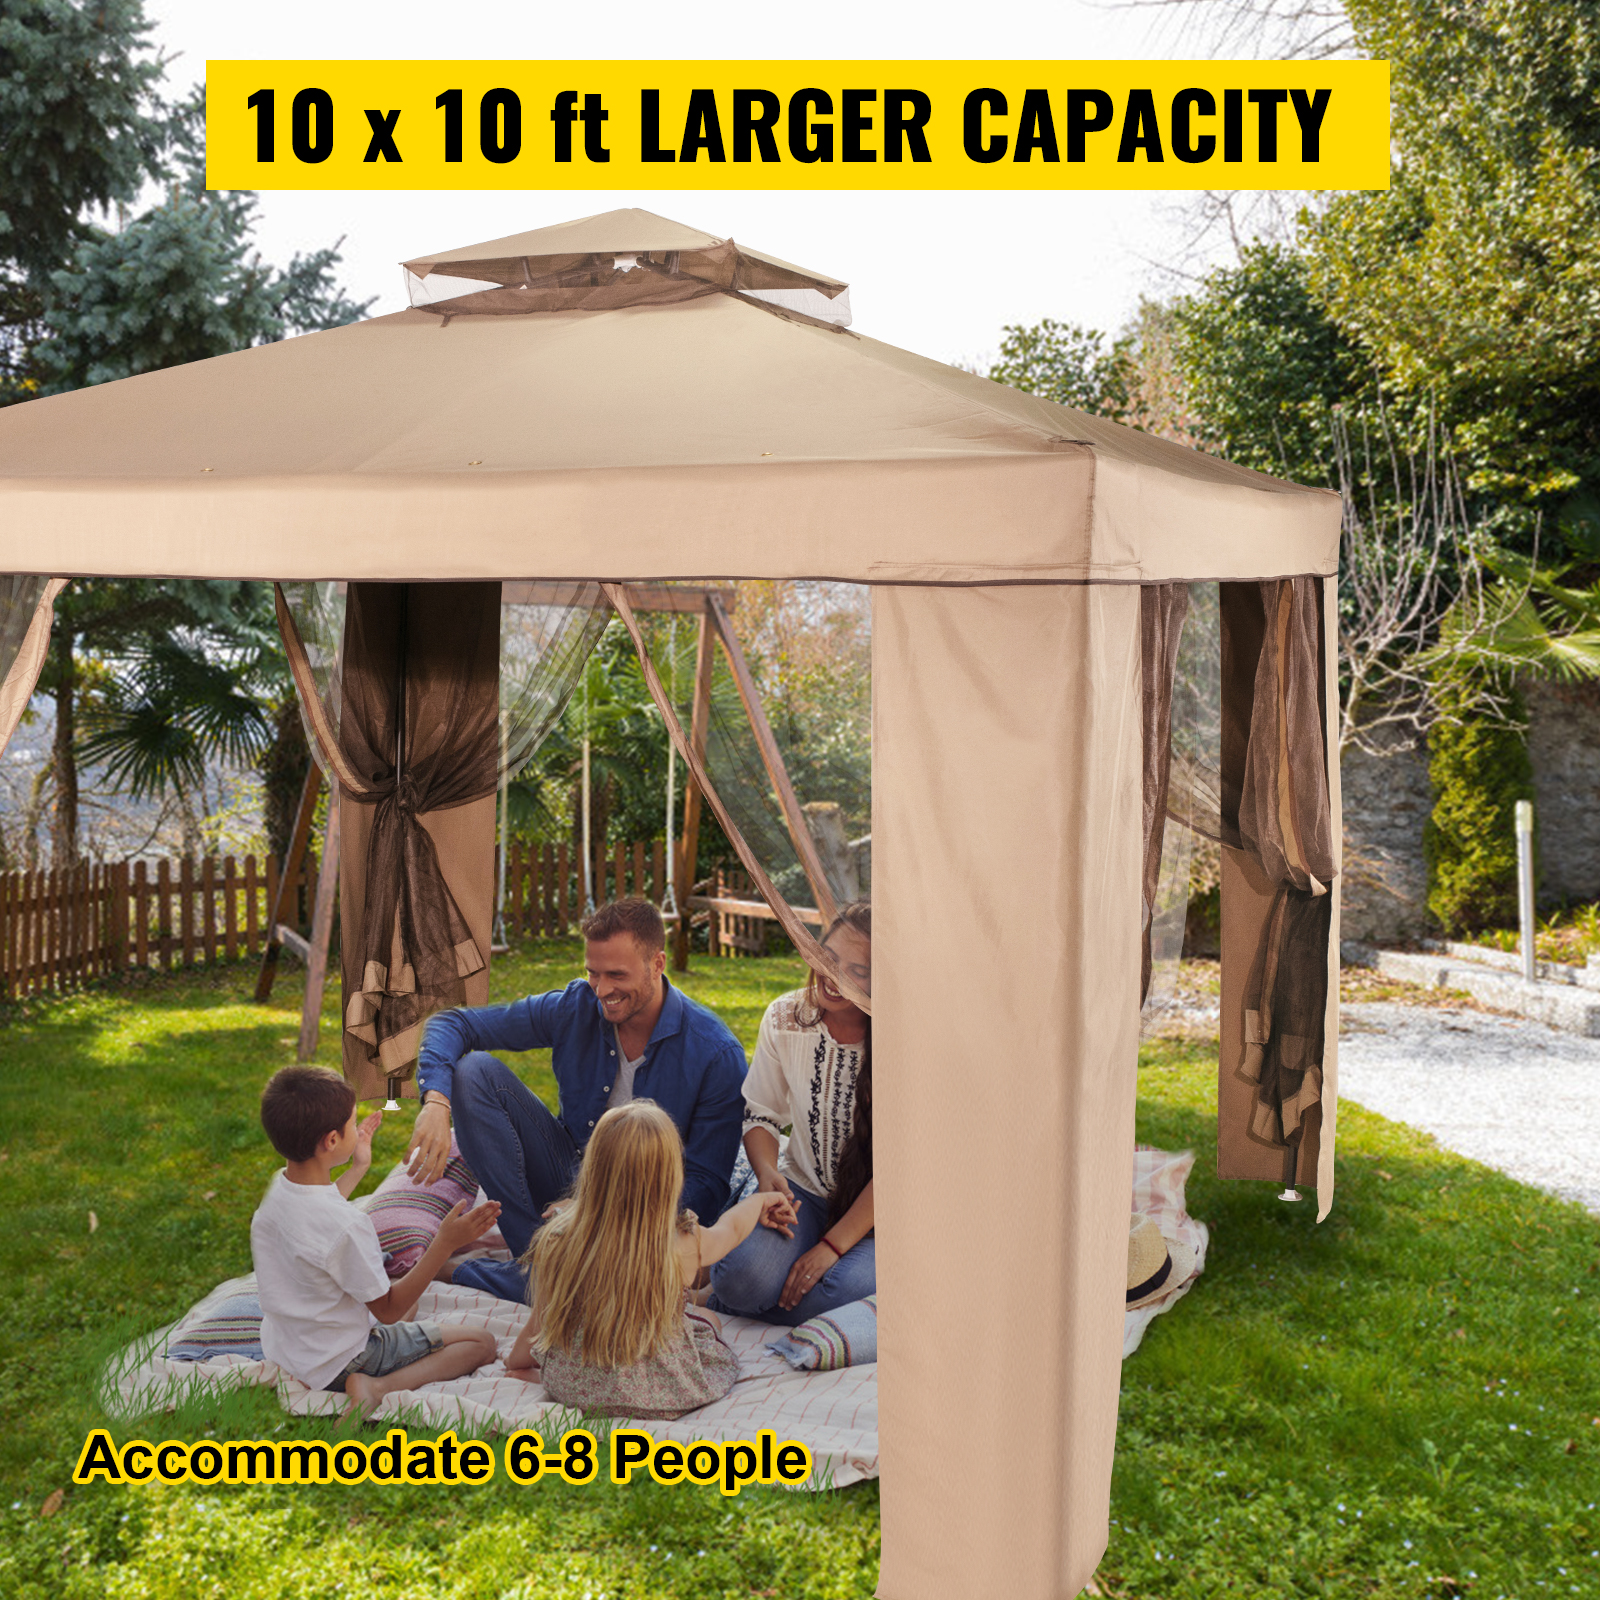 Outdoor Gazebo Tent Garden Shade Shelter Canopy Awning Party Camping Heavy Duty 